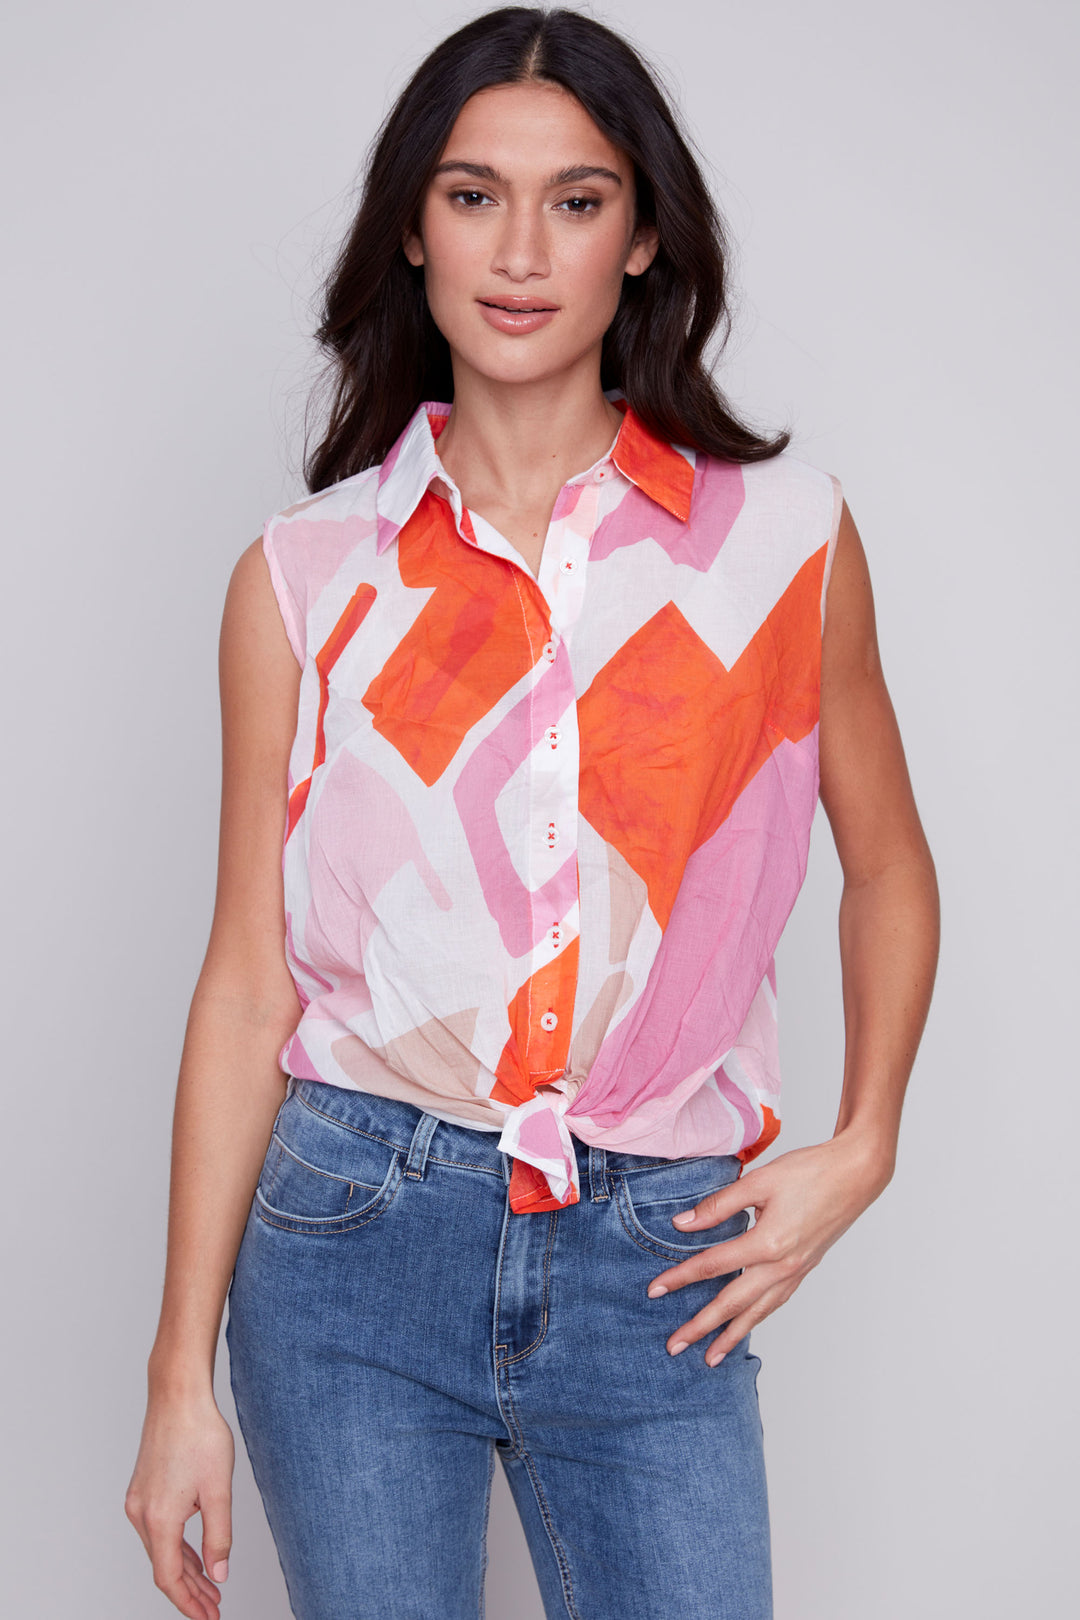 Lovely tie knot at the hem adds flair while hearts and abstract design print brings a playful touch. 